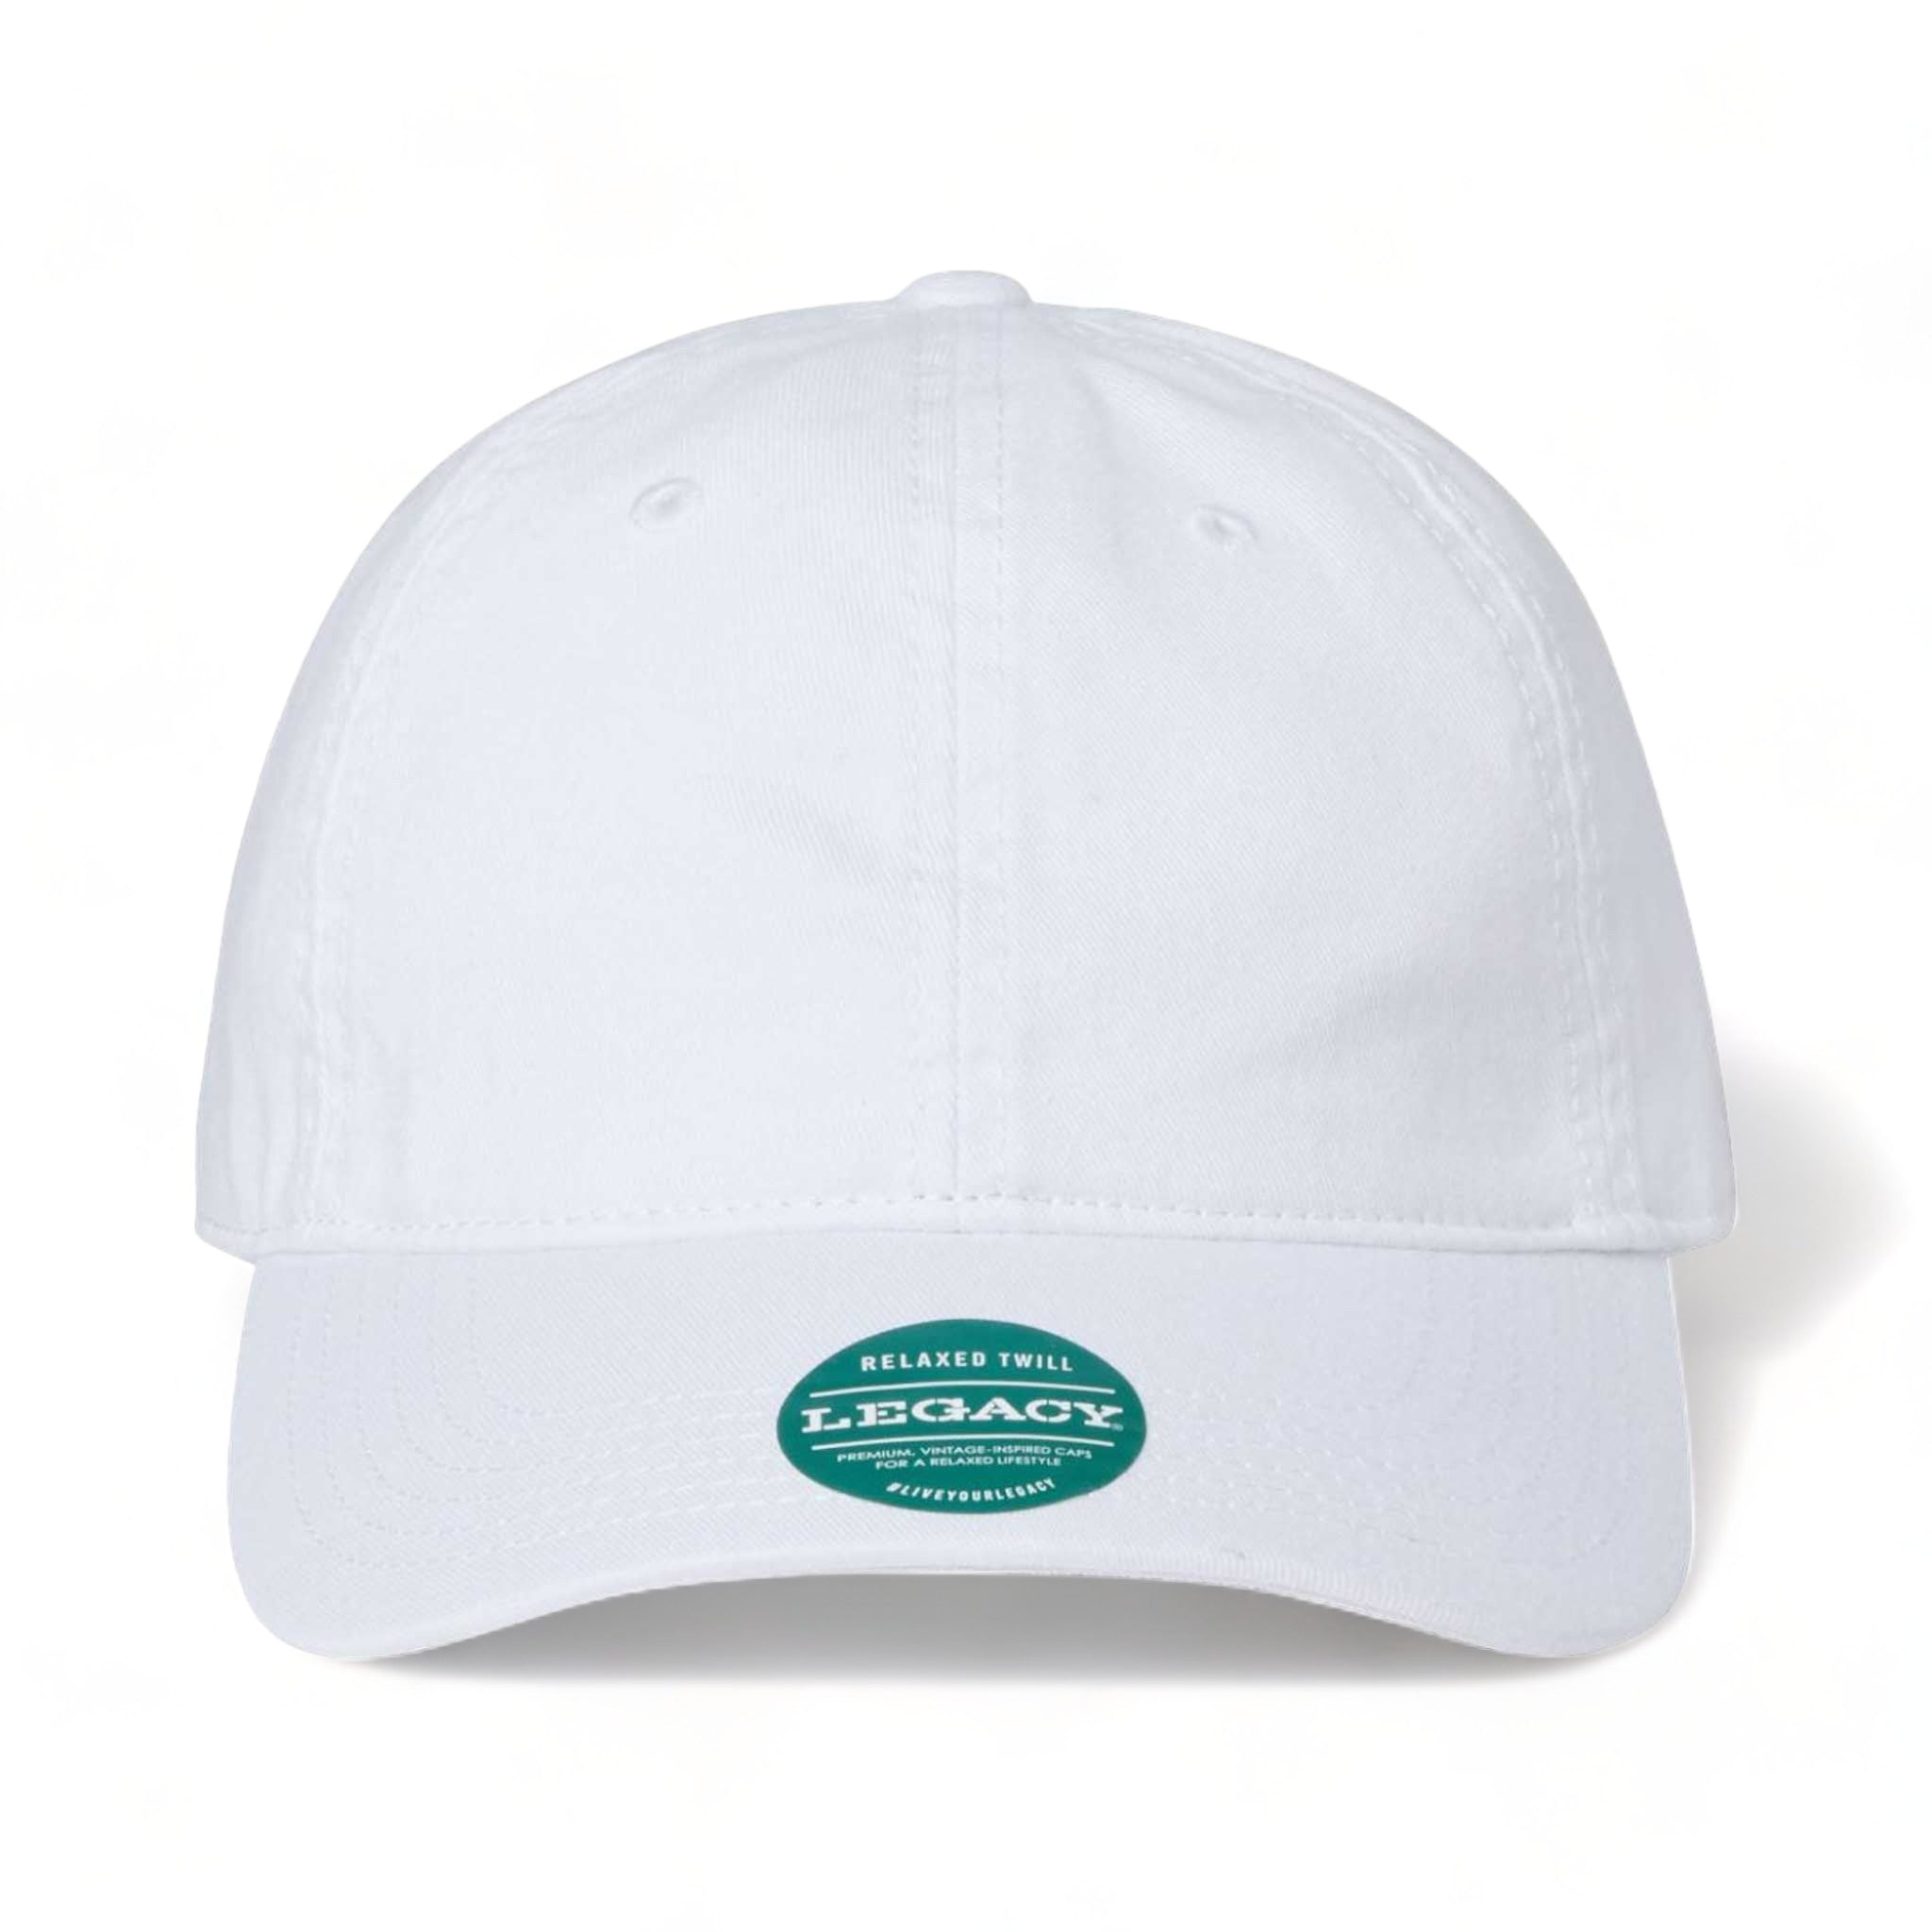 Front view of LEGACY EZA custom hat in white